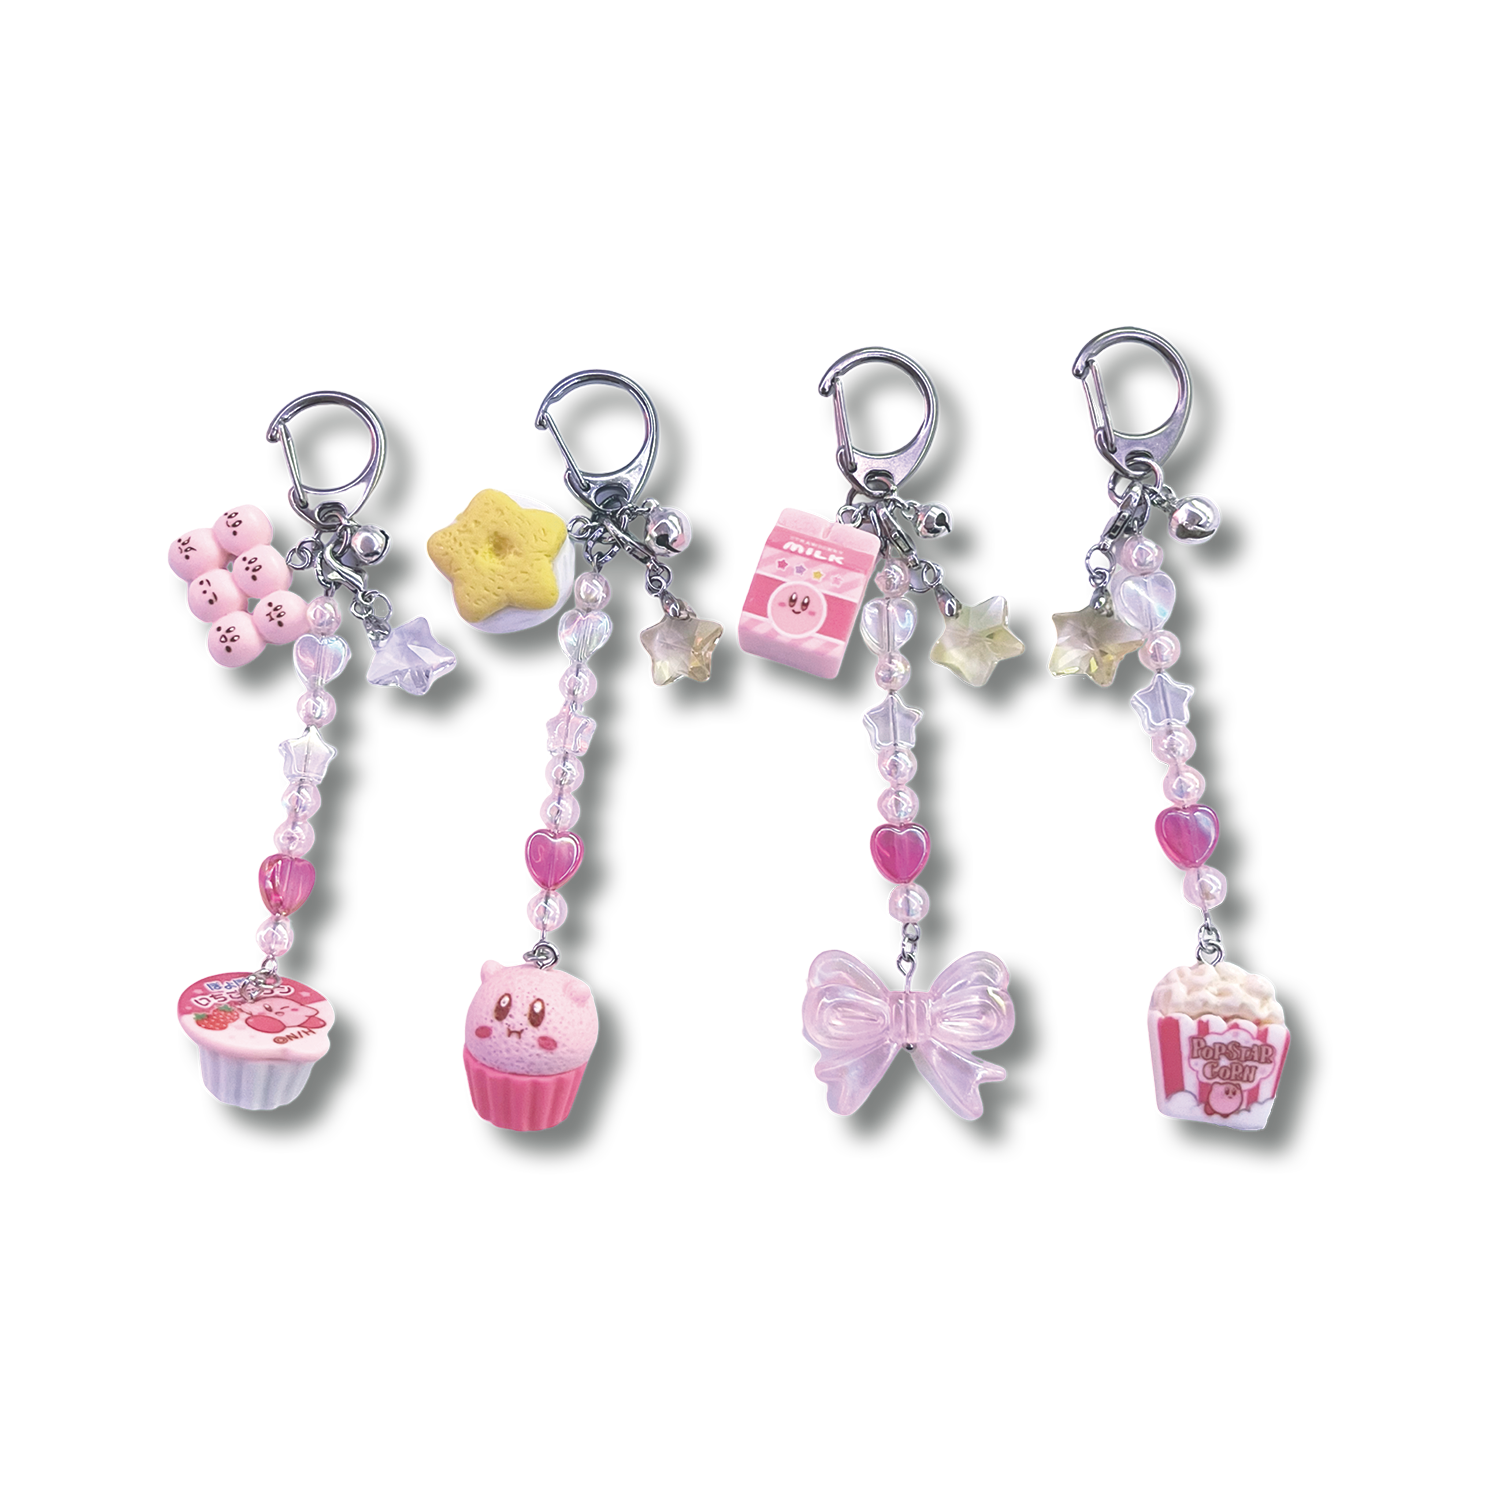 4 different assorted kirby keychains are pictured left to right, with the first one featuring a Kirby coffee creamer, second one is a Kirby cupcake, third is a Kirby milk carton, and fourth and last one is Kirby popcorn, all arranged respectively.